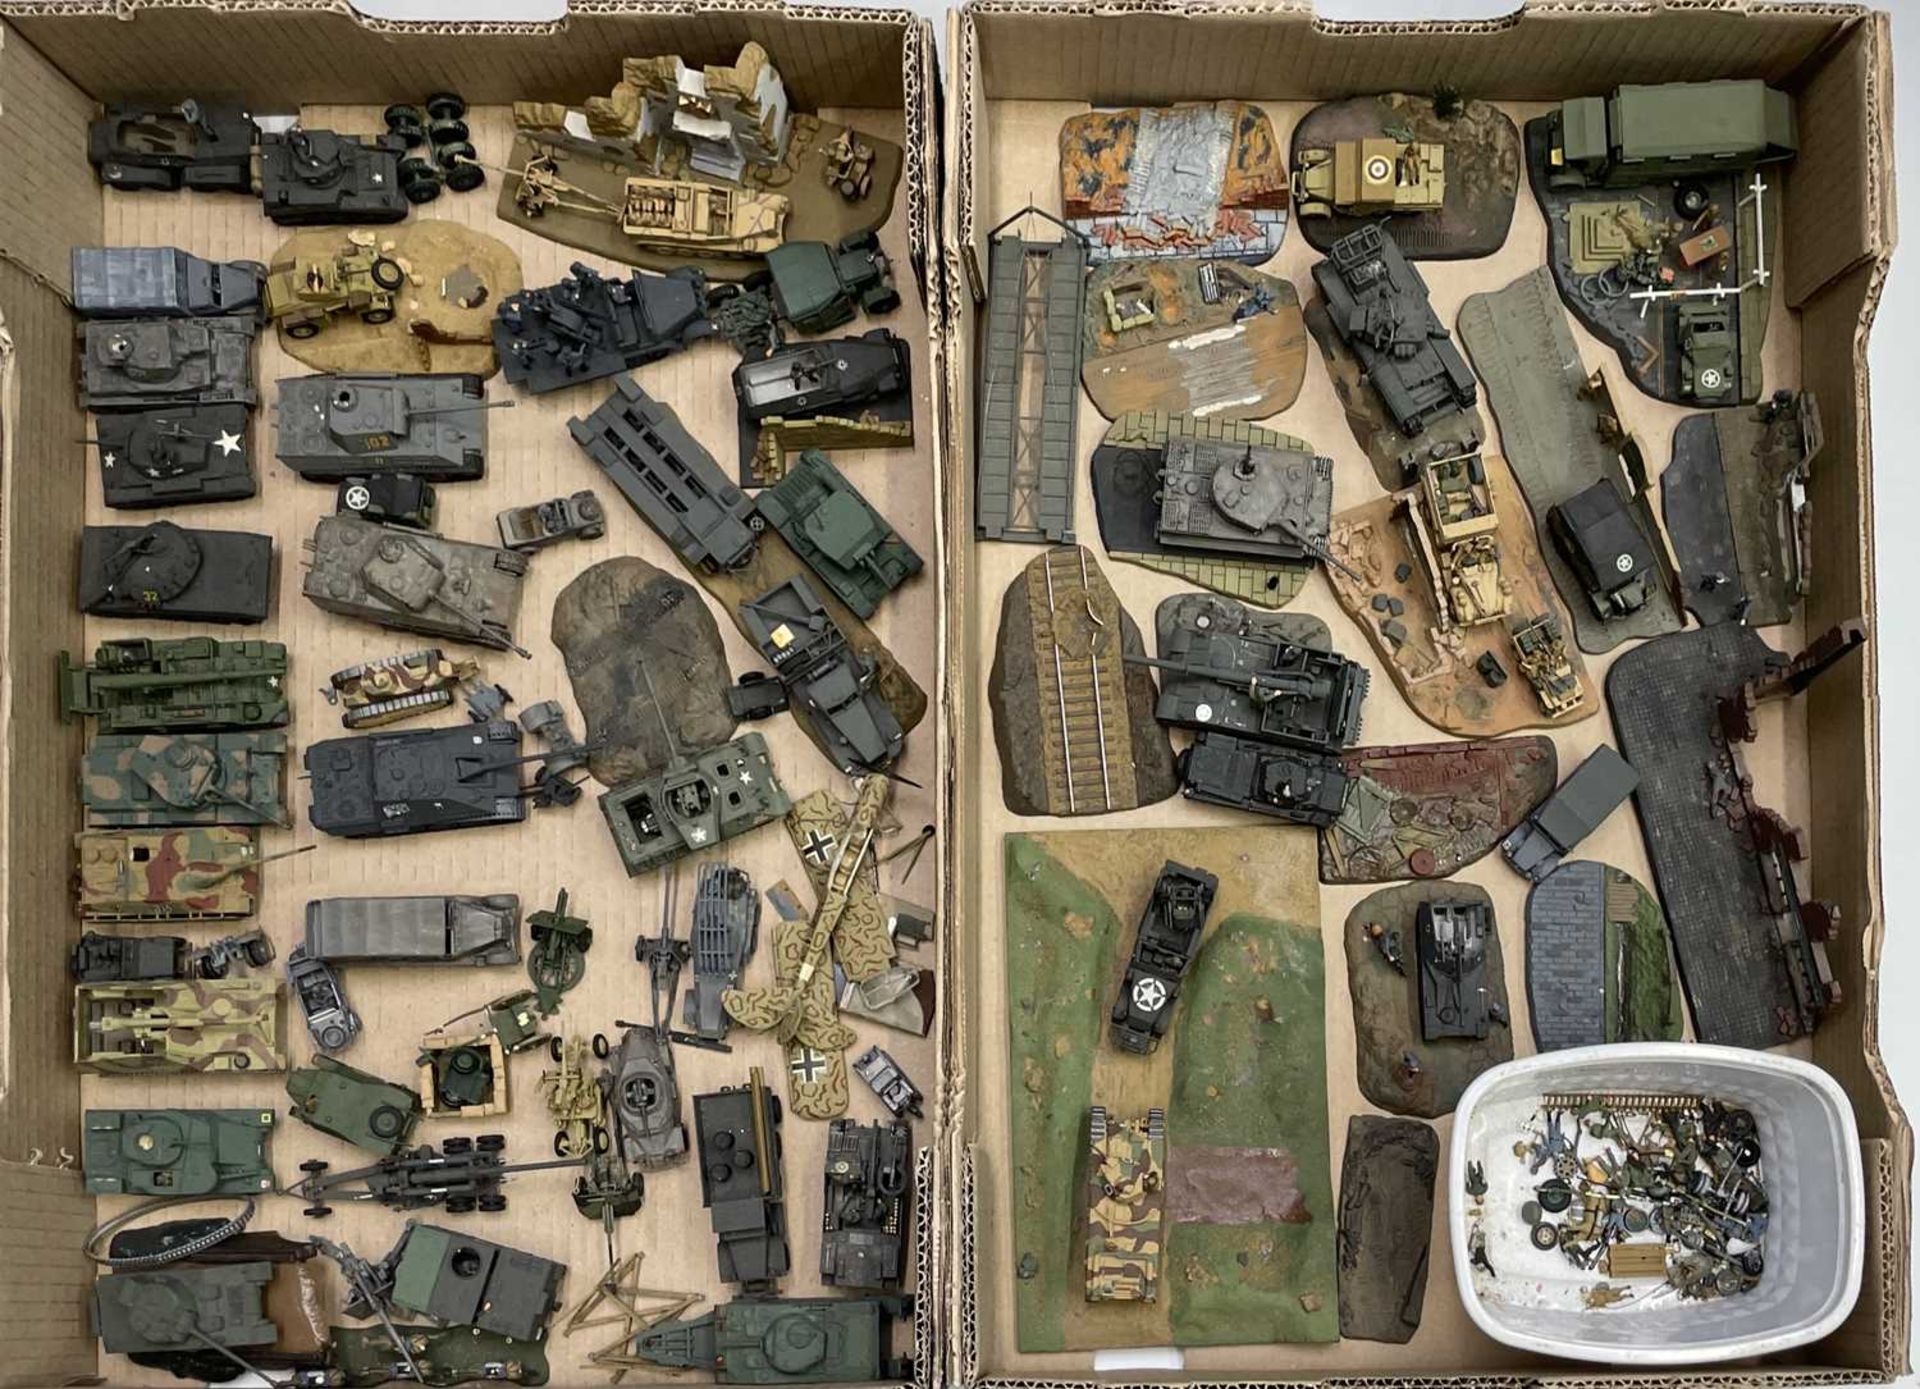 Military - well painted plastic kit Military Vehicles / Small Dioramas. Two boxes containing in